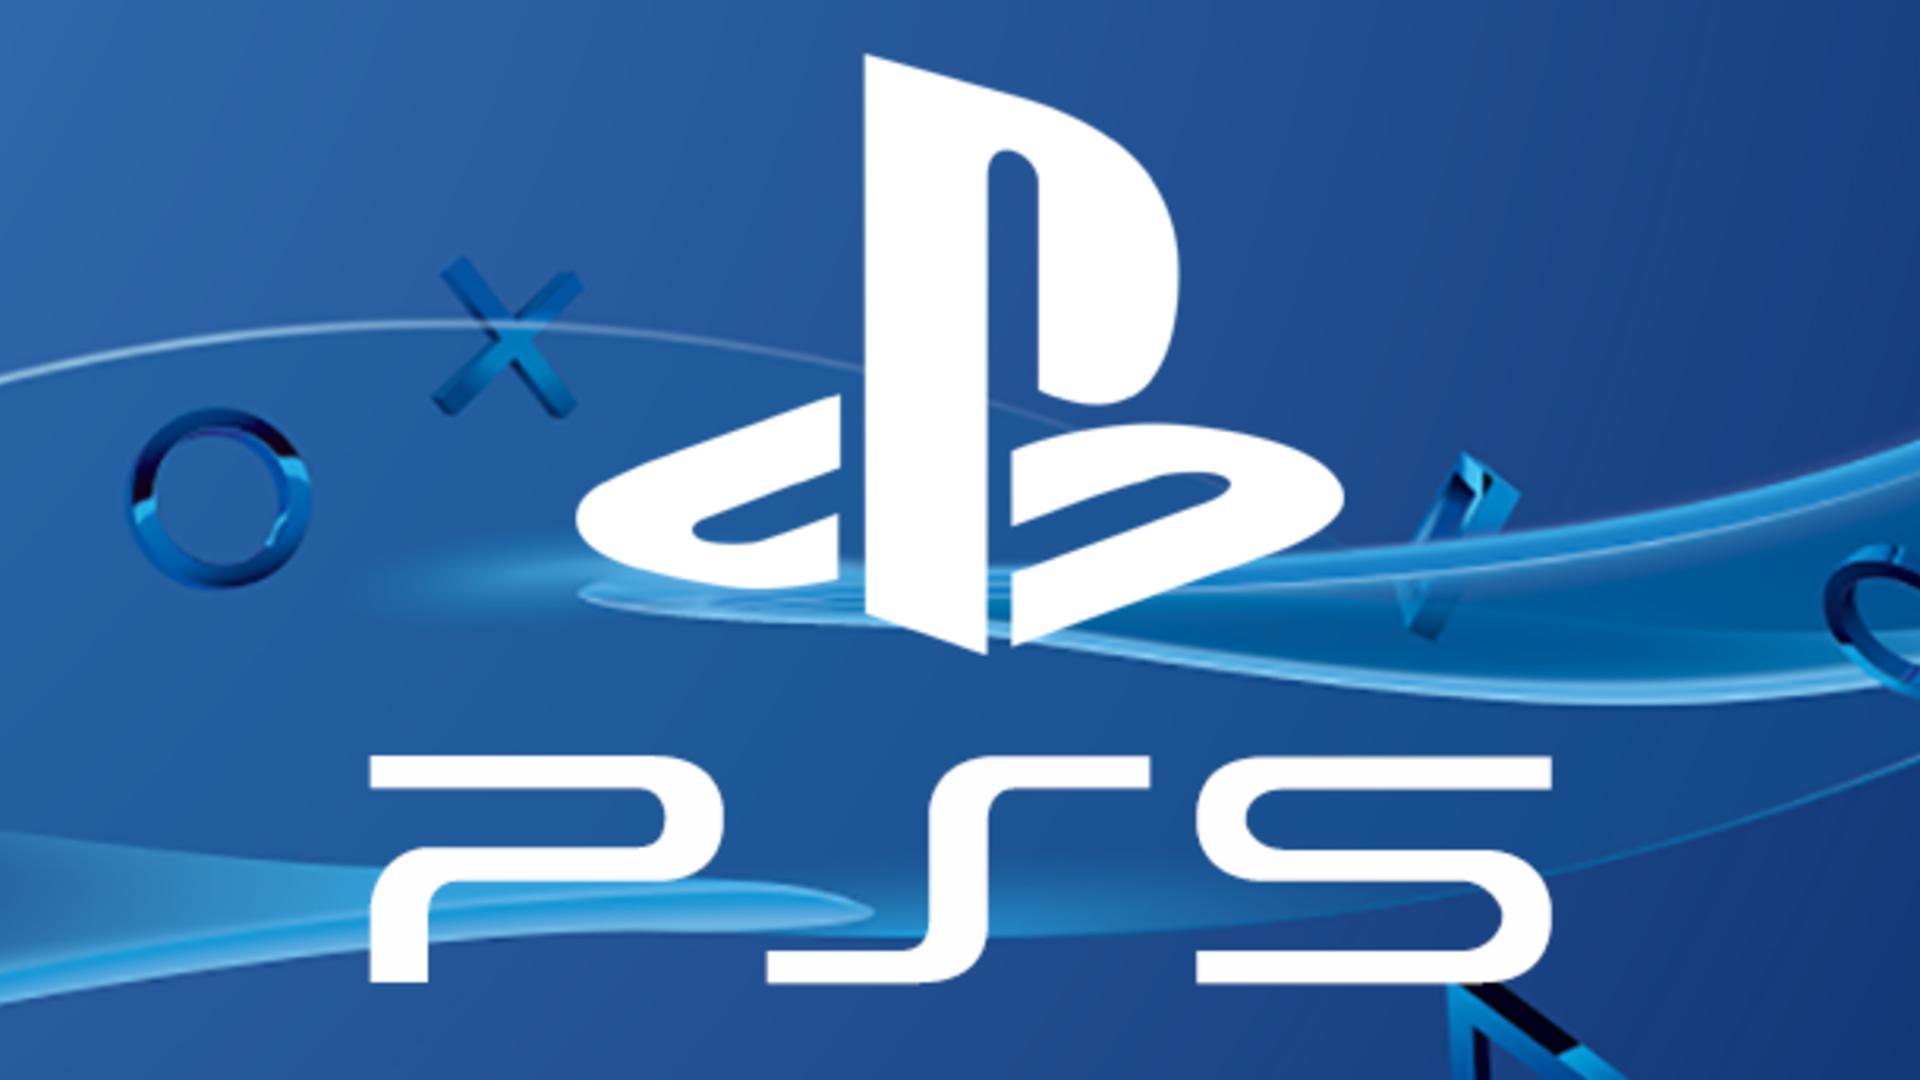 Ps5 Logo Wallpaper 4k Sony Ps4 Dualshock 4 Close Up Photography Of